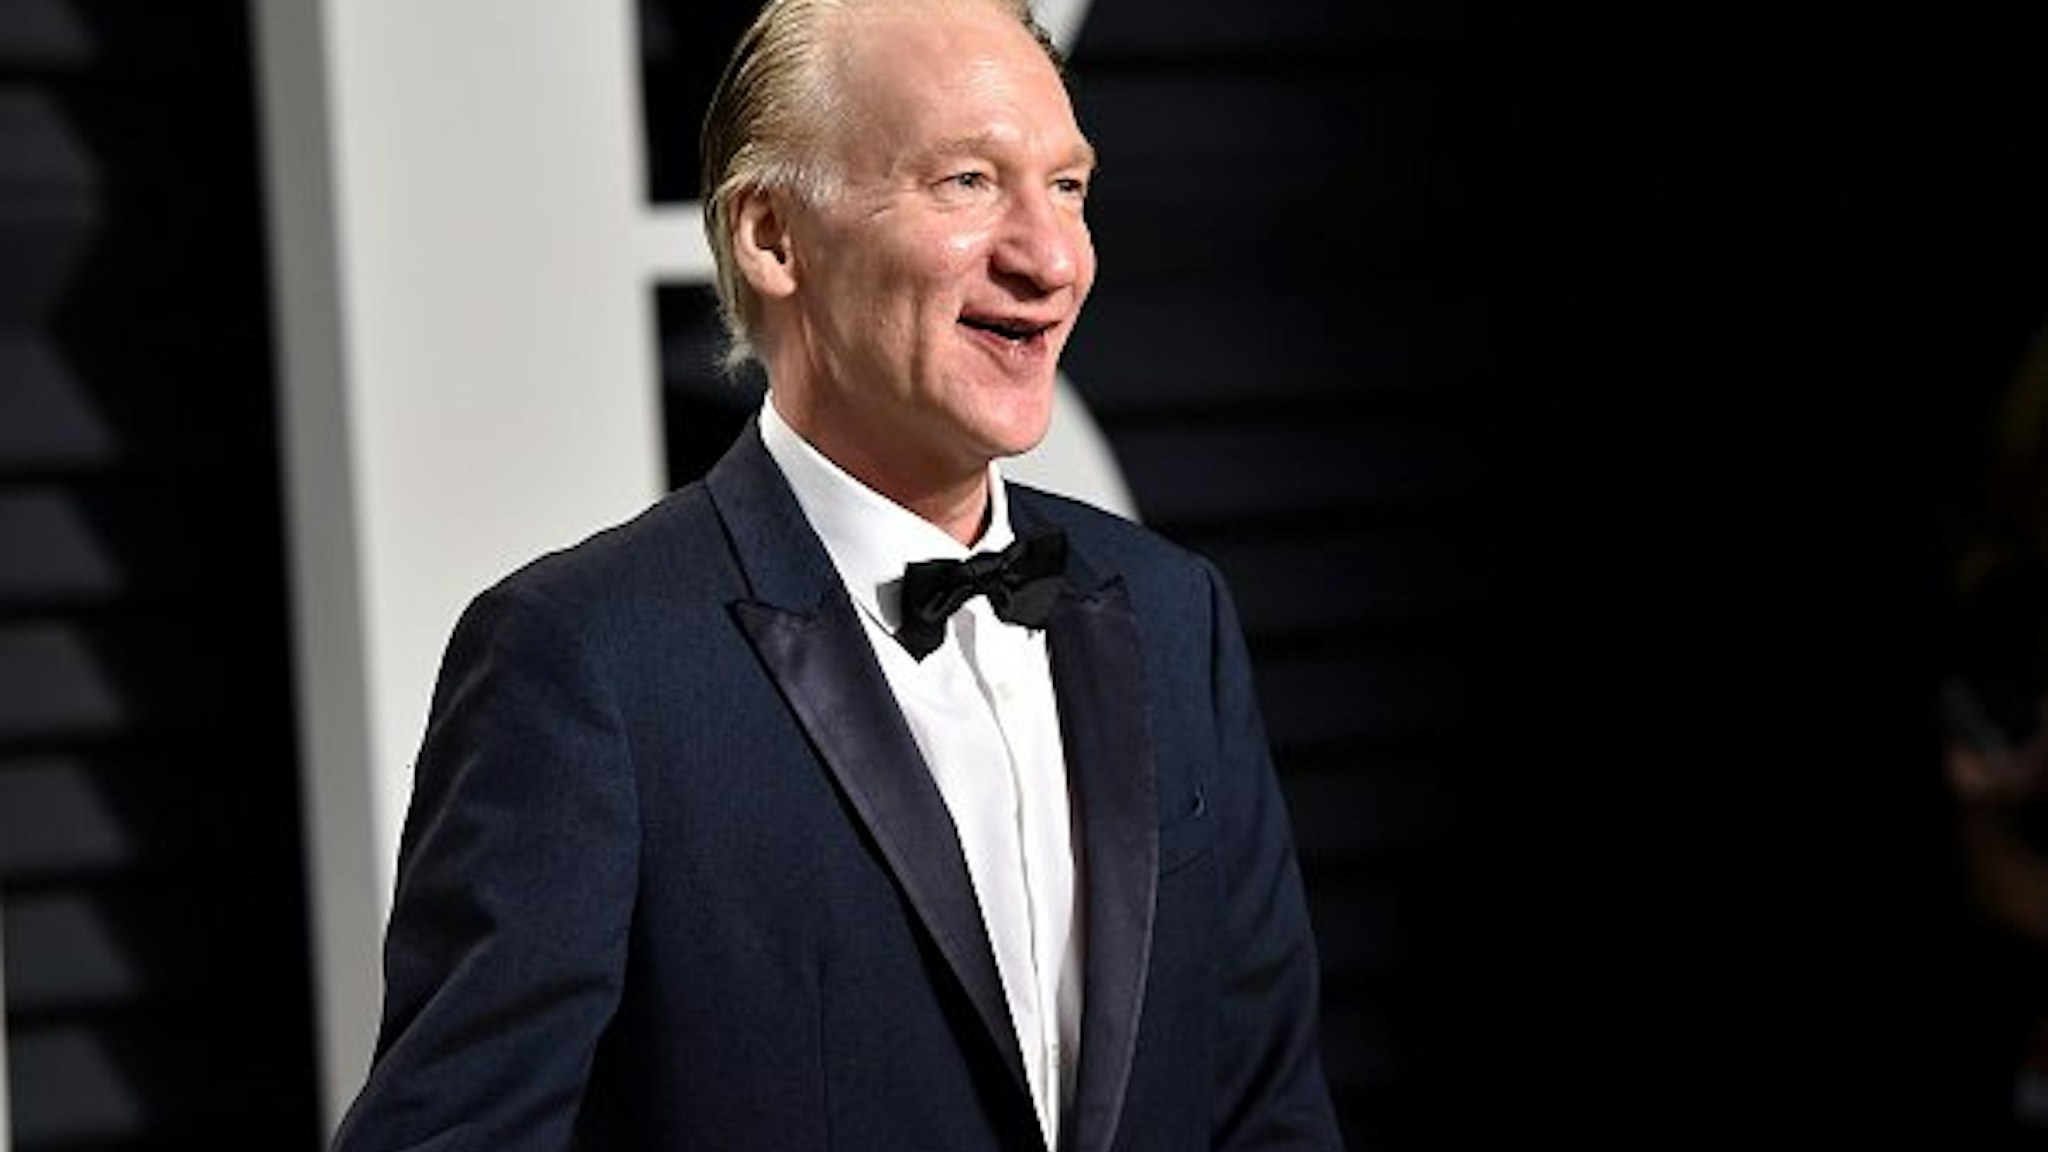 Television personality Bill Maher attends the 2017 Vanity Fair Oscar Party hosted by Graydon Carter at Wallis Annenberg Center for the Performing Arts on February 26, 2017 in Beverly Hills, California.